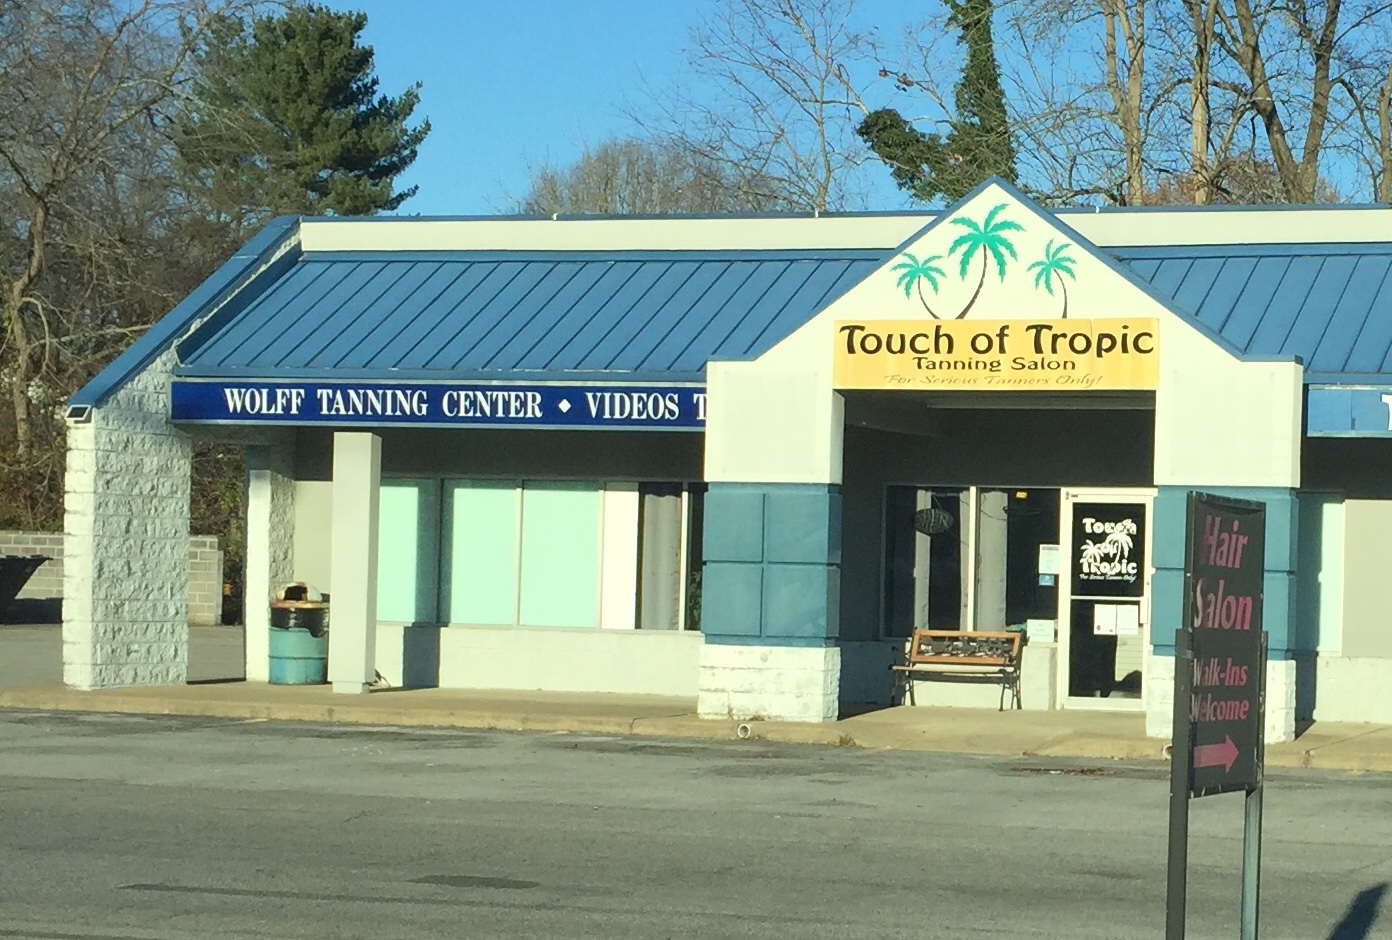 Touch of Tropic Tanning Salon